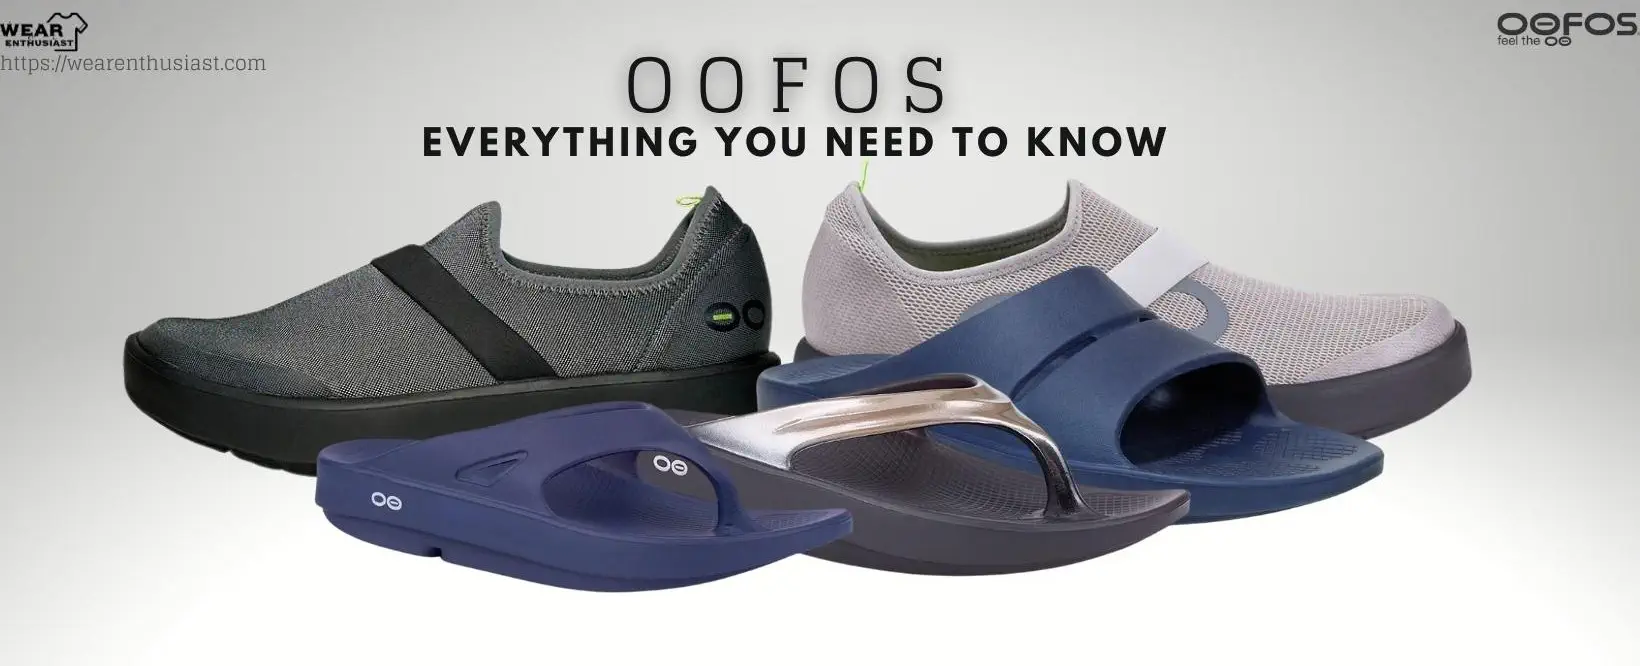 Oofos Everything You Need to Know